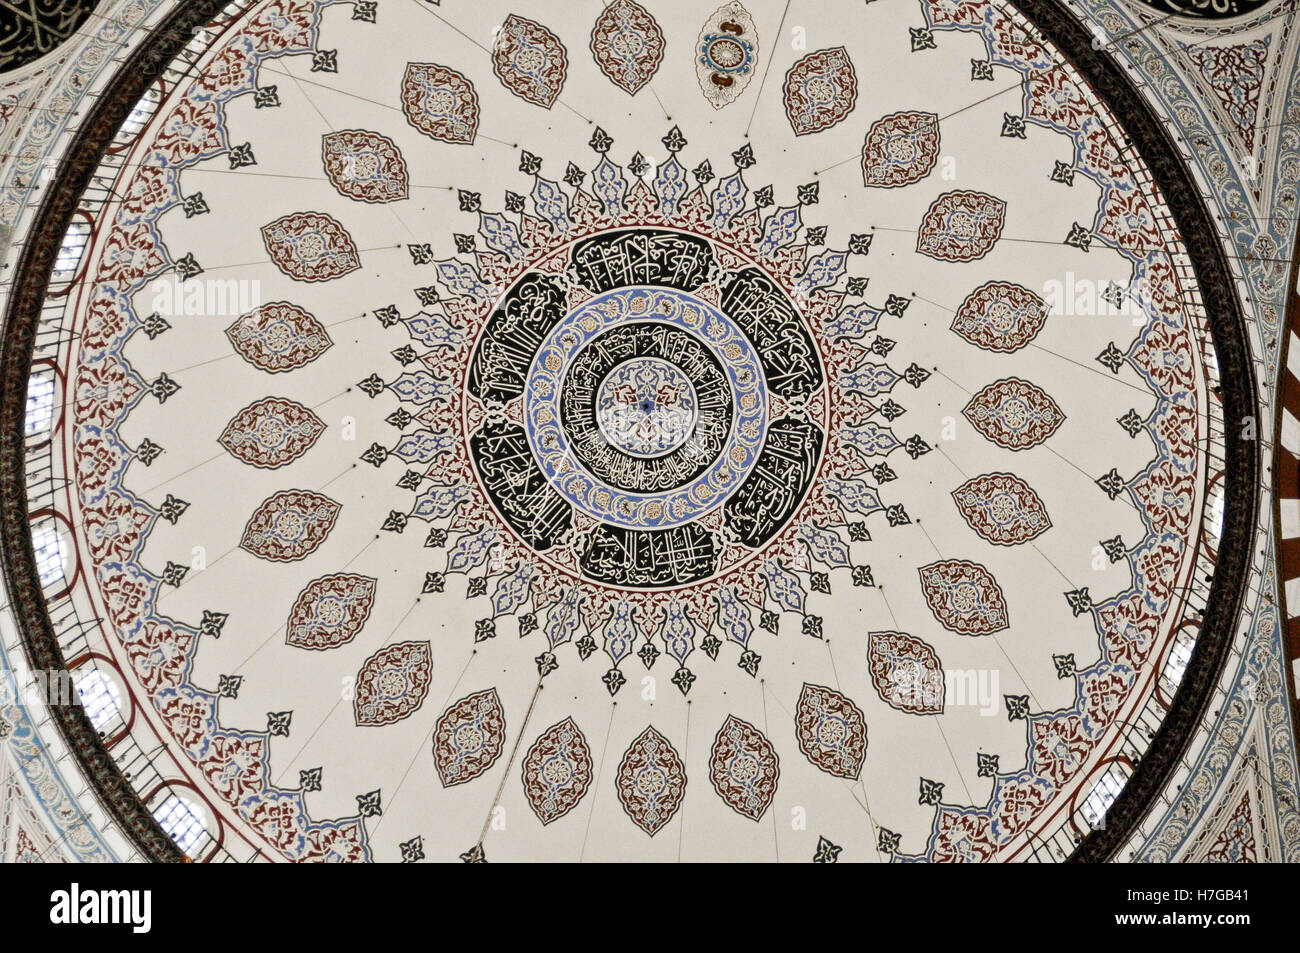 Şehzade Mosque ( 'Prince's Mosque), Interior of the dome. Istanbul, Turkey Stock Photo